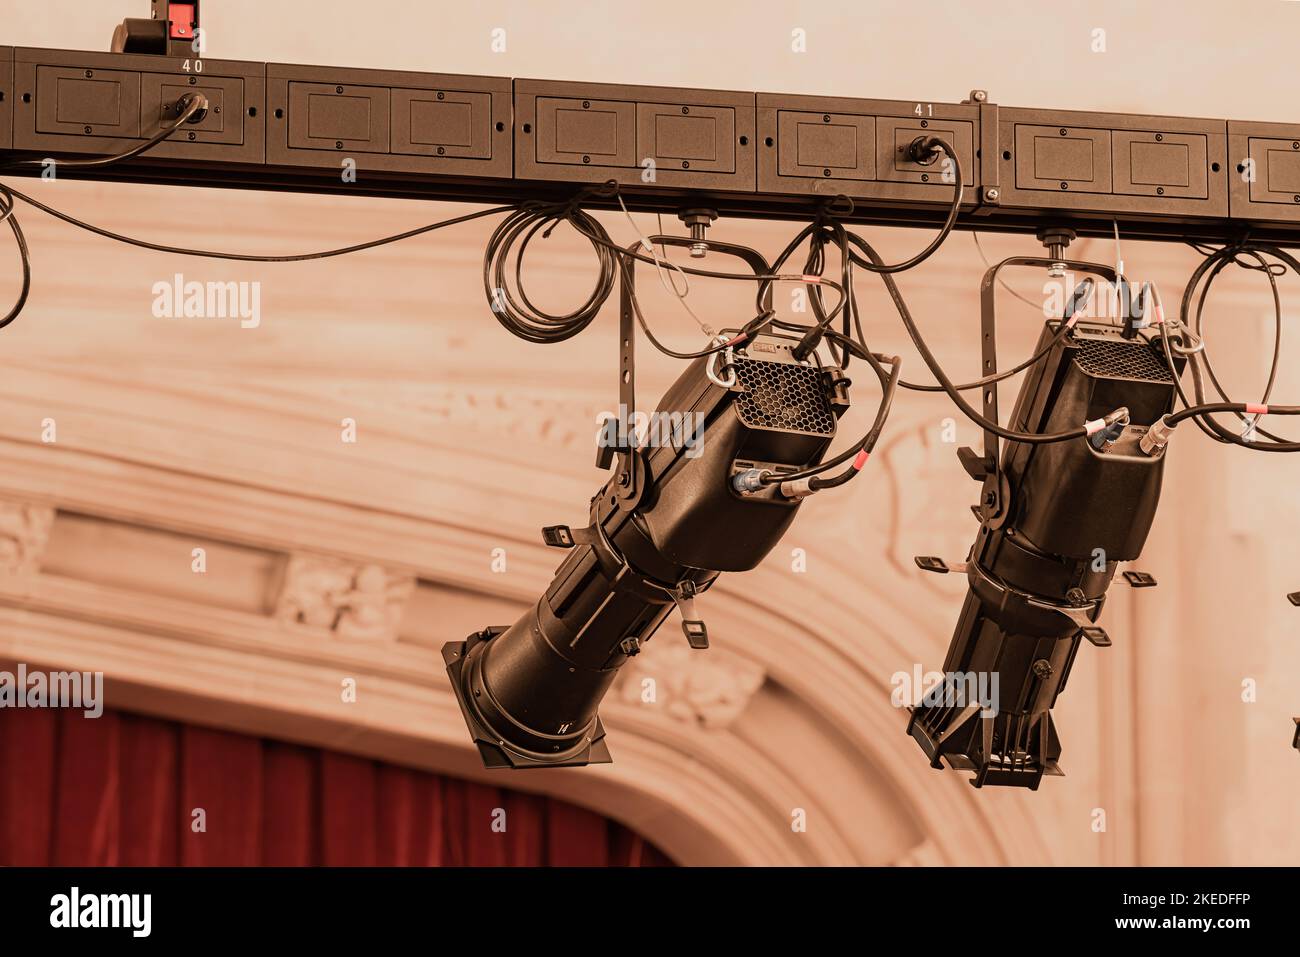 Closeup photo of two new large theater spot lights hung within an older theatre or auditorium. Stock Photo